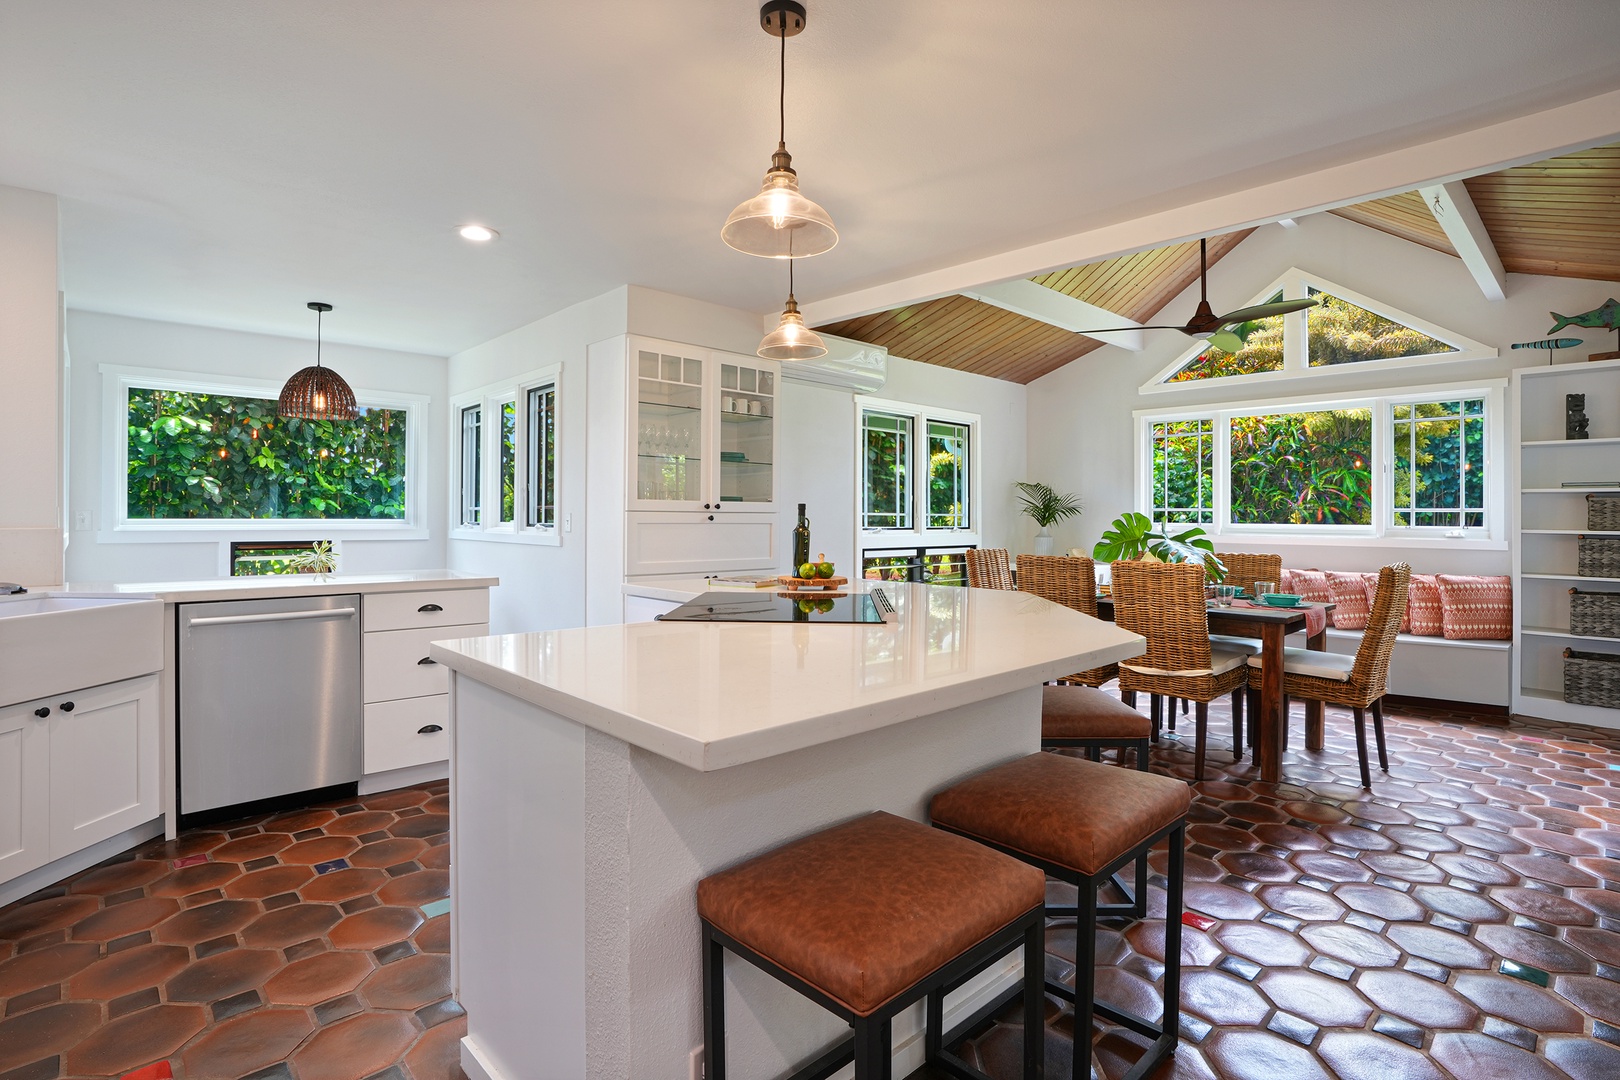 Princeville Vacation Rentals, Kaiana Villa - Enjoy cooking a fresh meal in this amazing kitchen